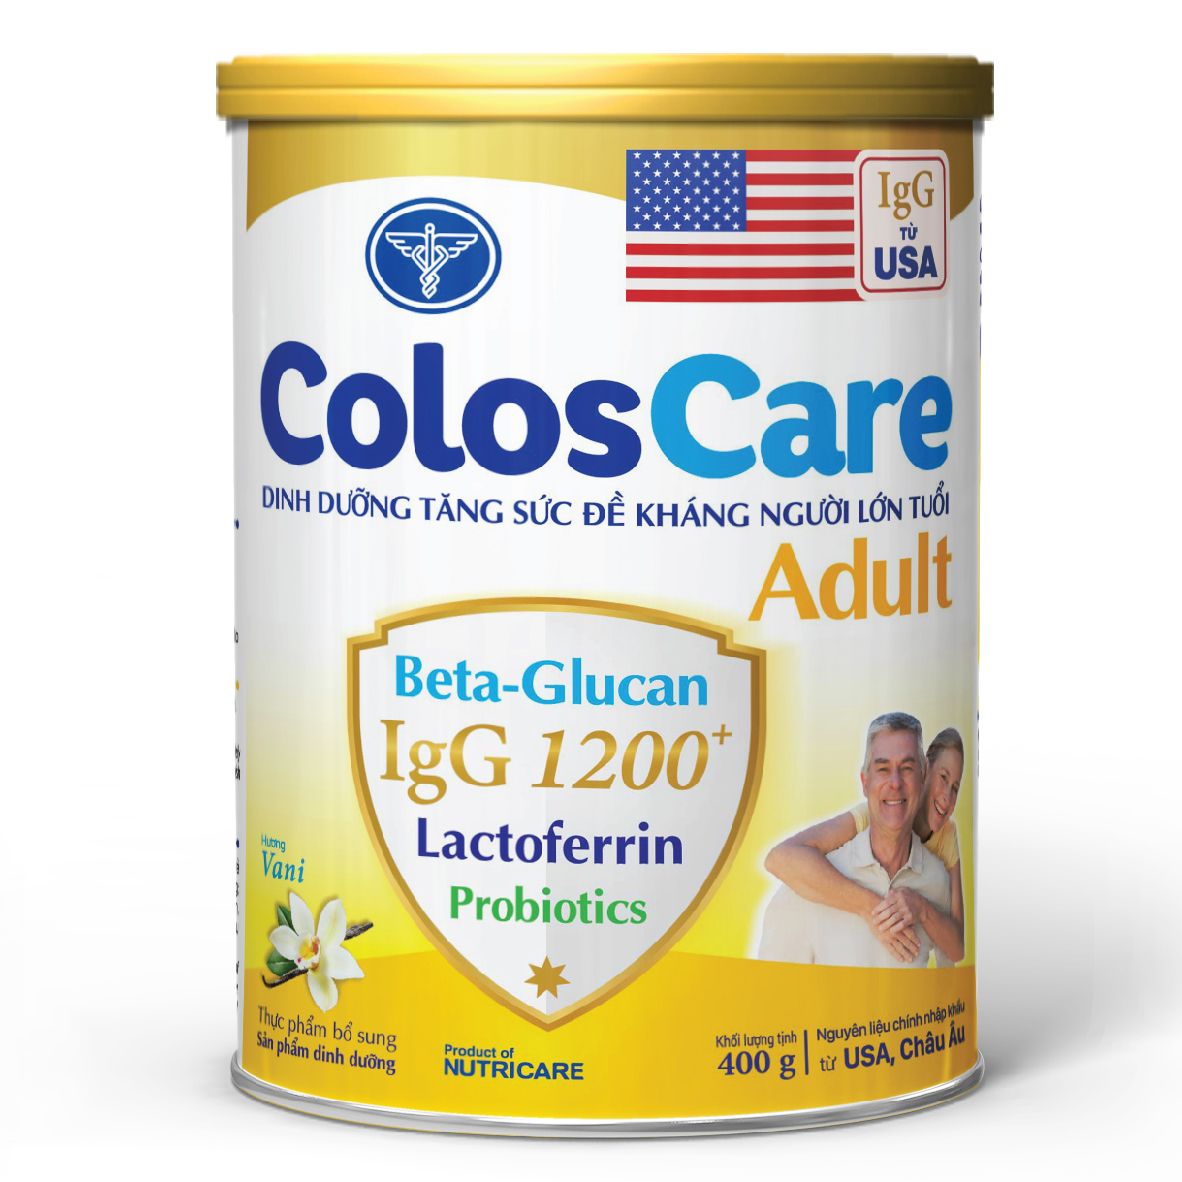  SỮA BỘT COLOSCARE ADULT 